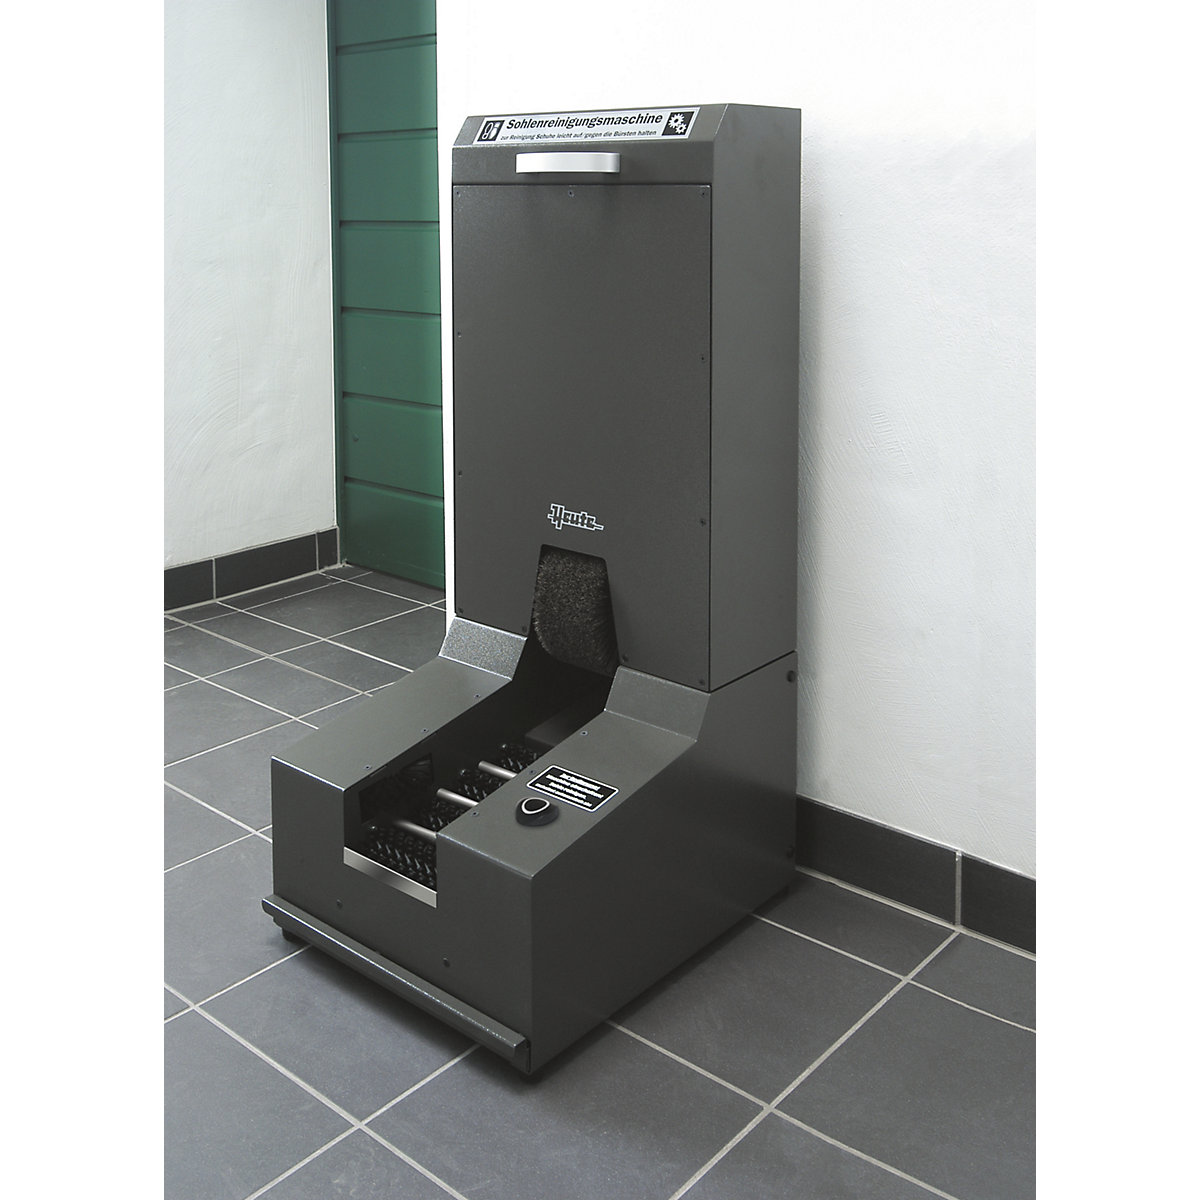 SOLAMAT 100 dry sole cleaning machine - Heute